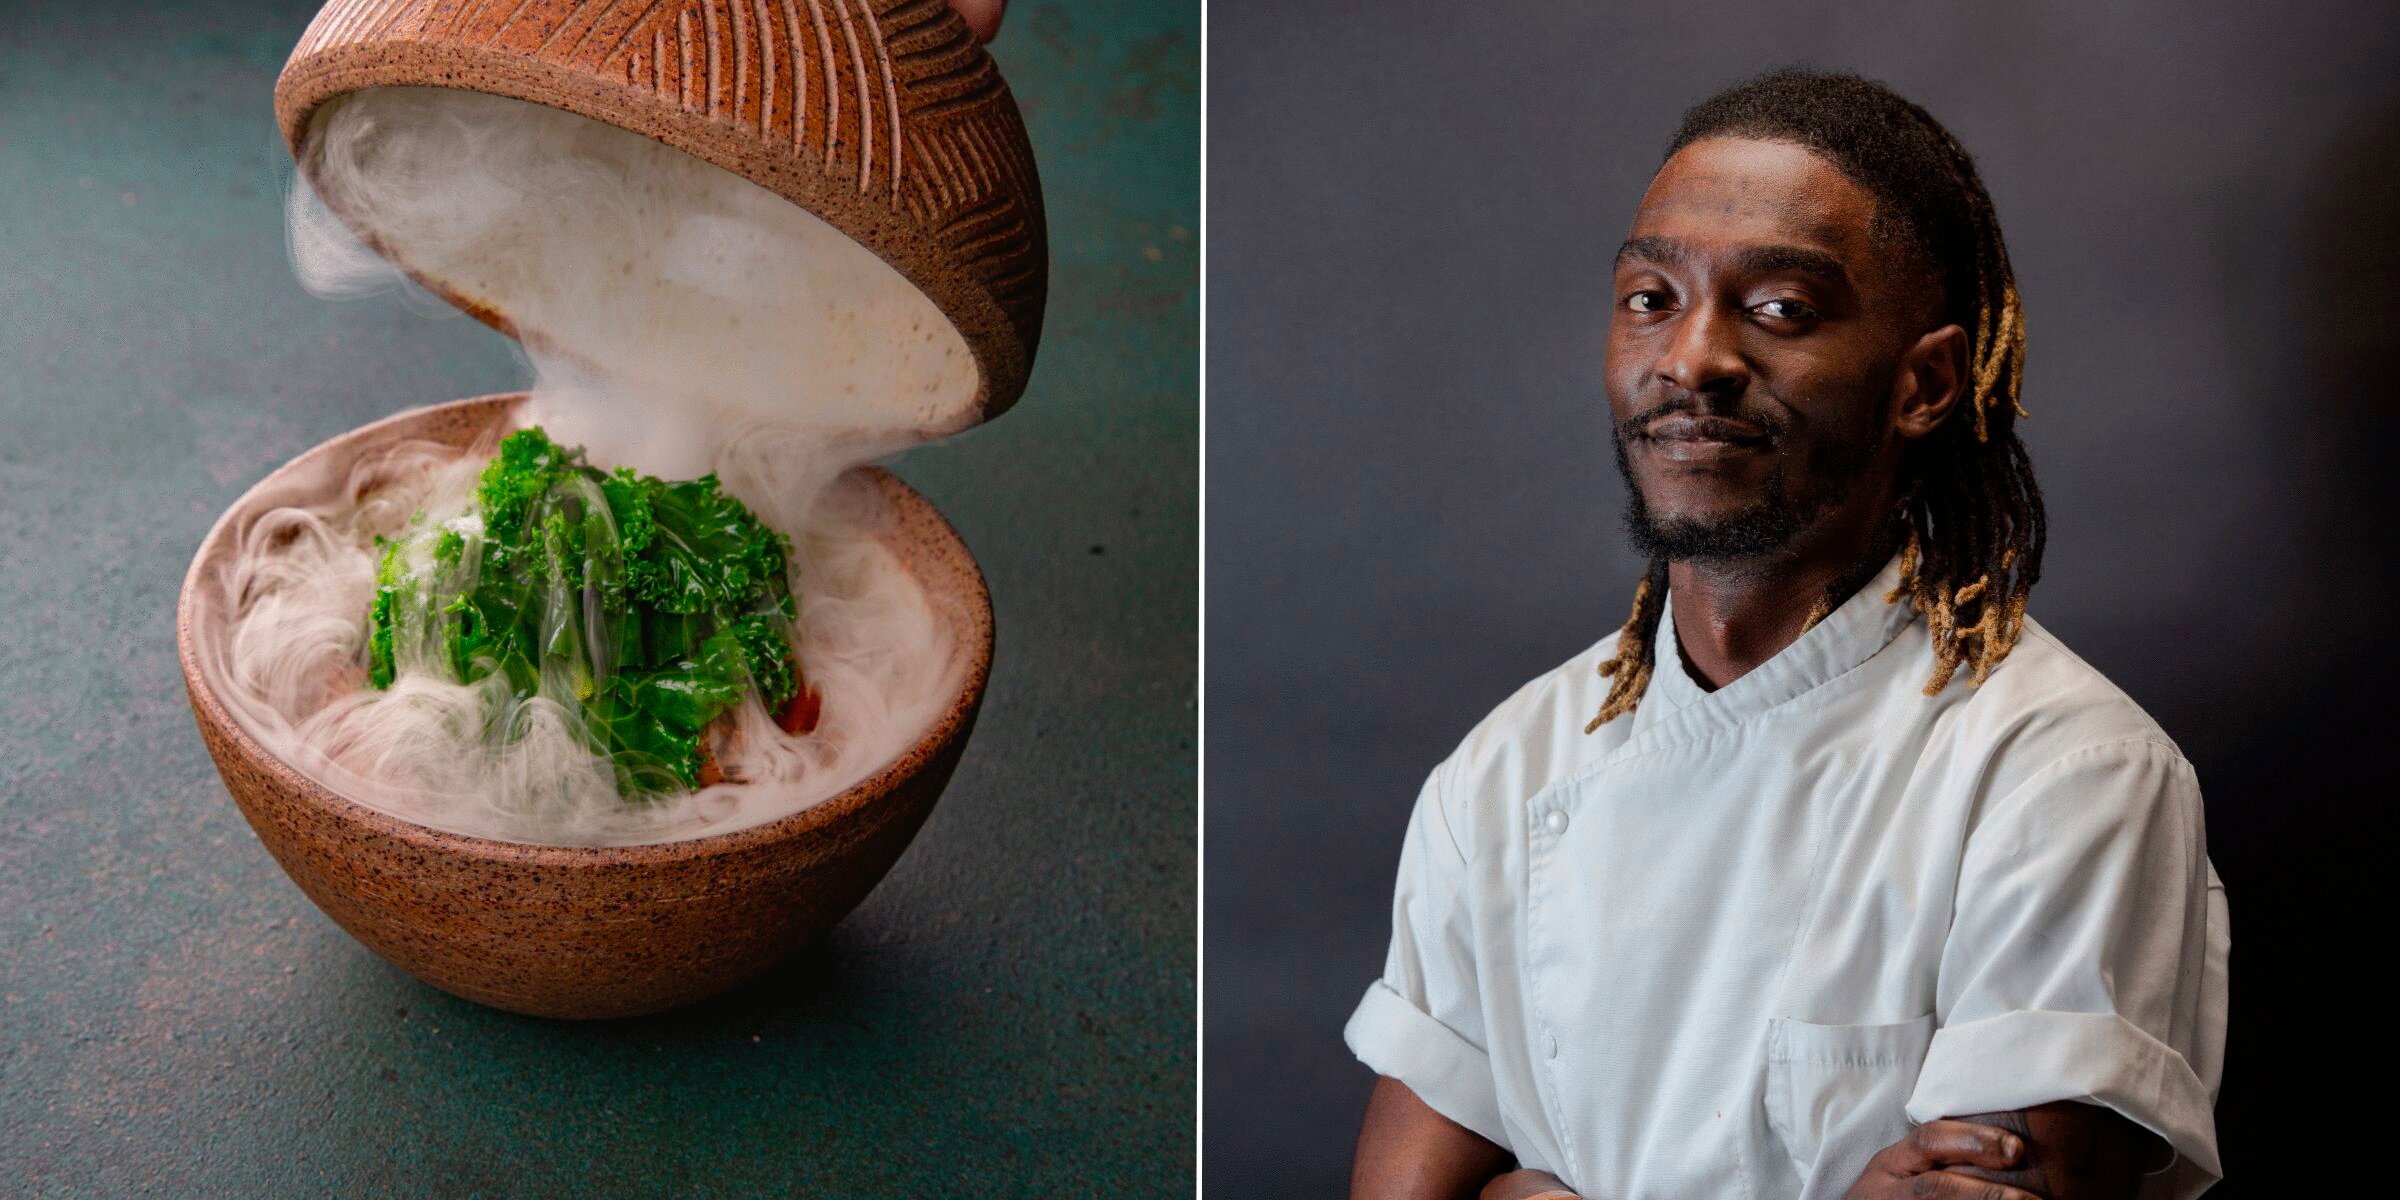 West African restaurant Akoko to open in October with William Chilila at the helm